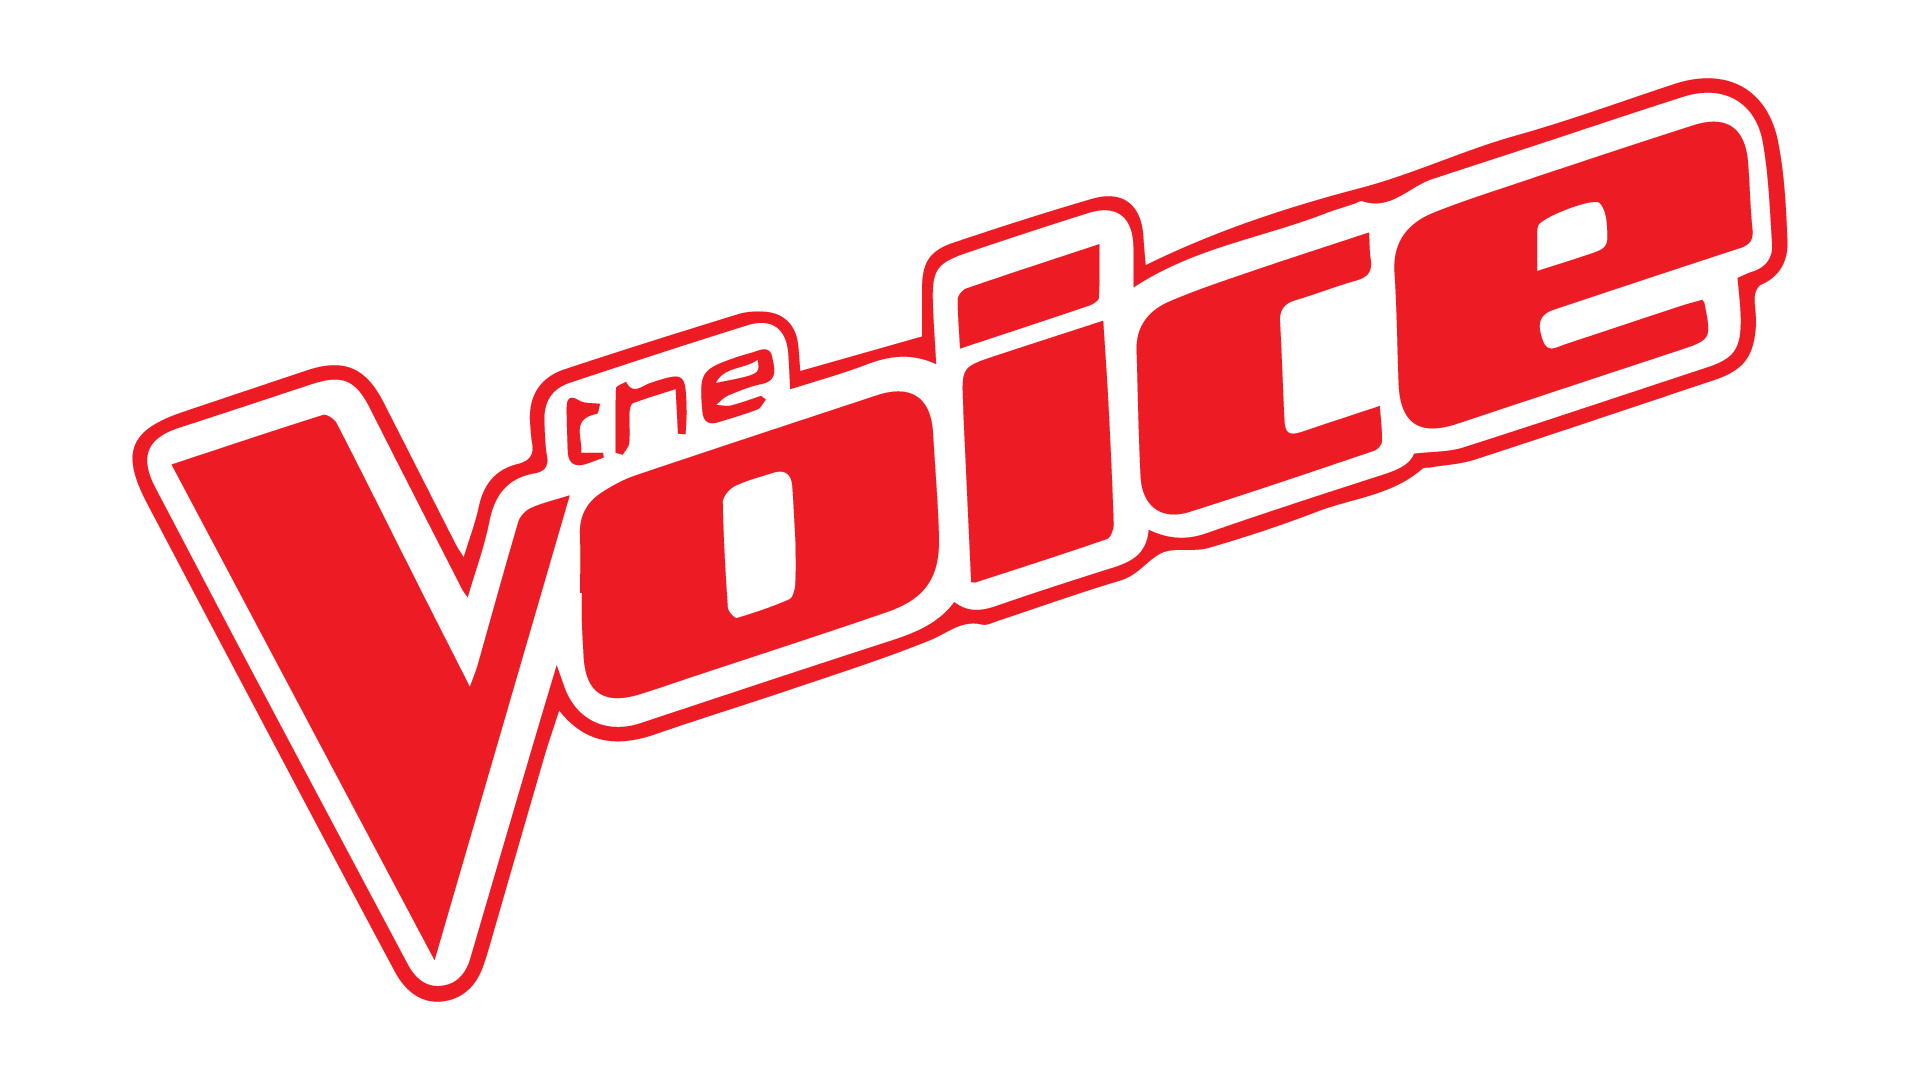 The-voice-logo.png